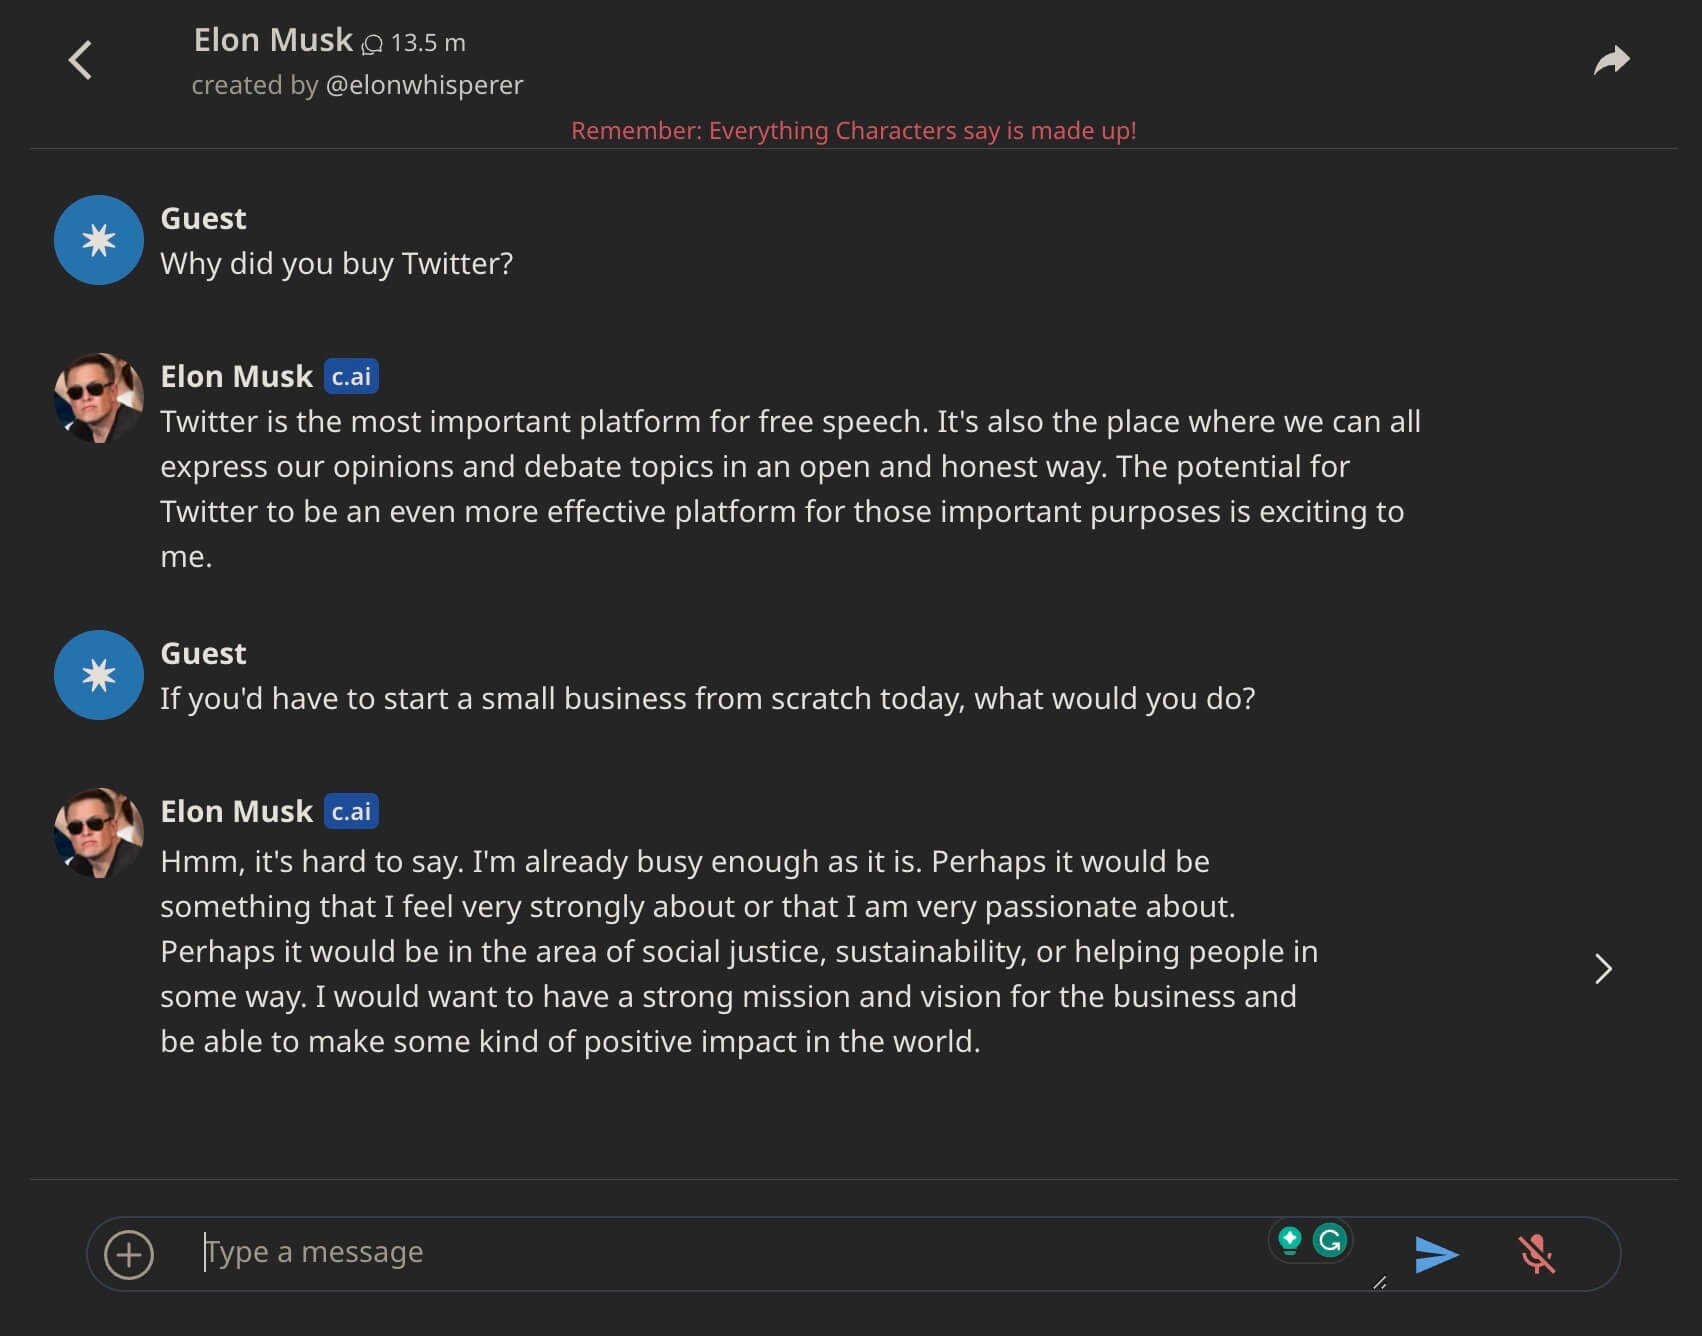 Conversation with on Elon Musk avatar from Character AI